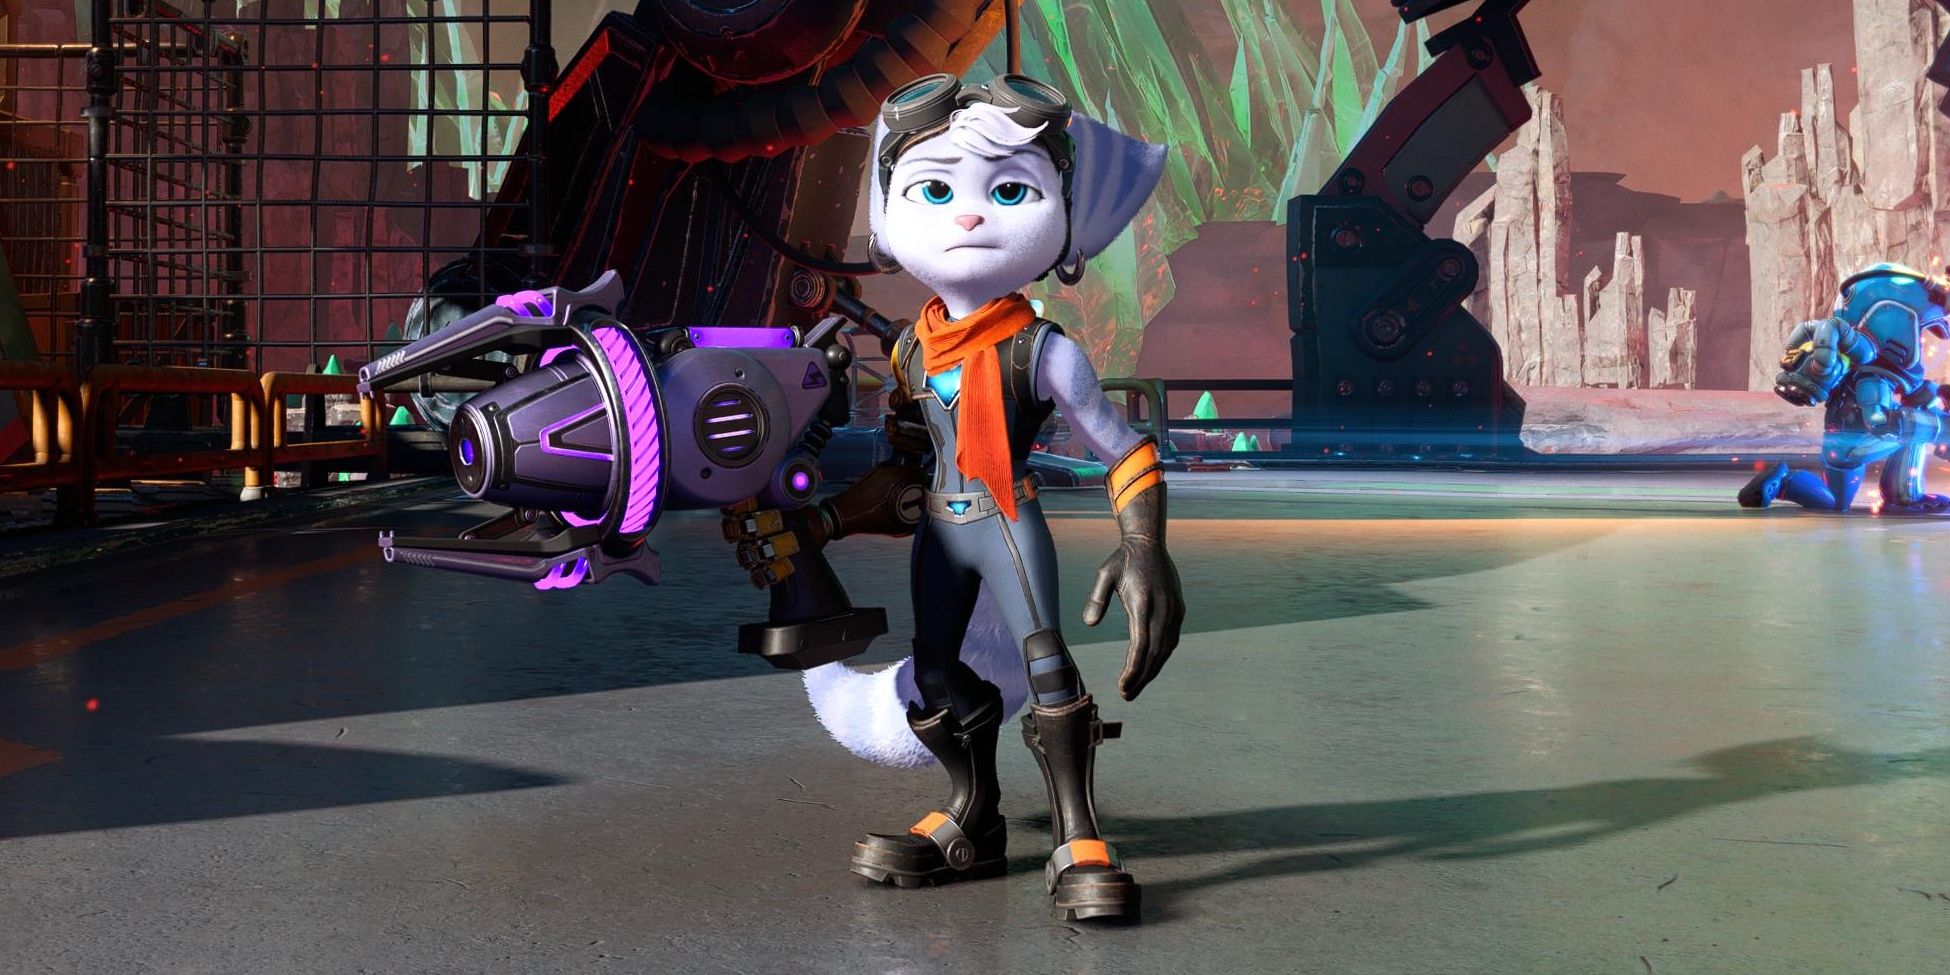 An unamused Rivet holding the Lightning Rod weapon in Ratchet and Clank: Rift Apart